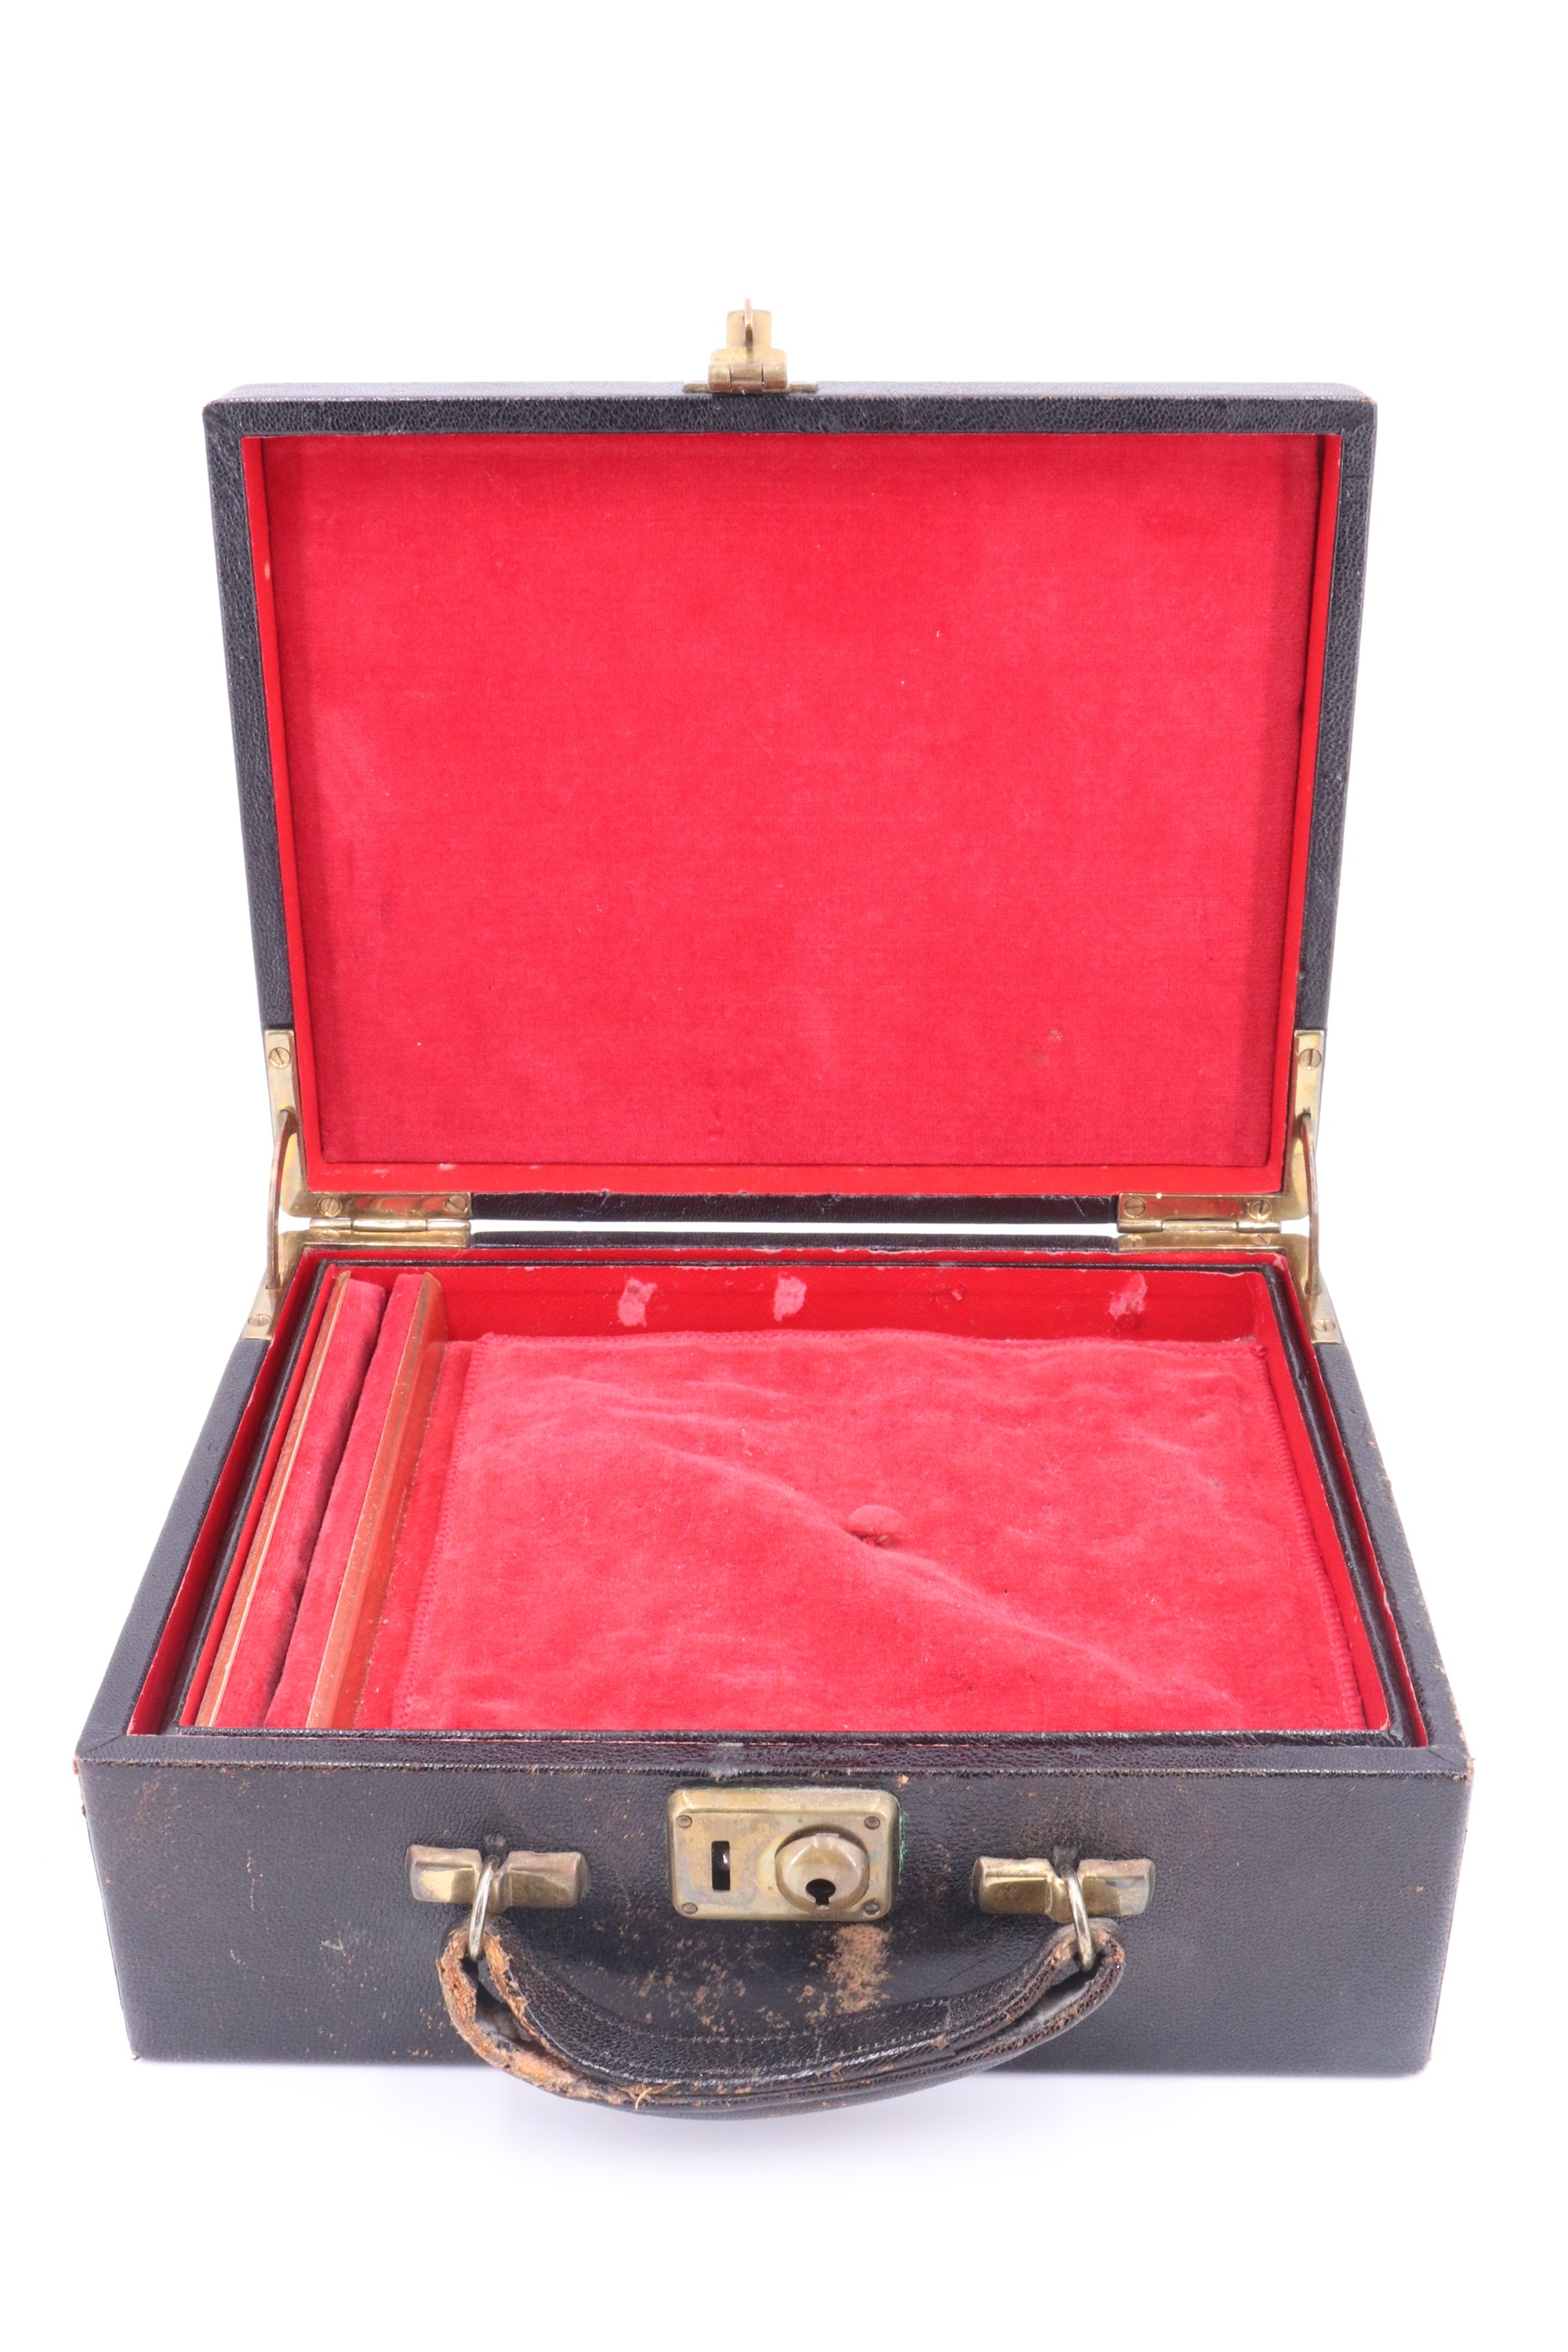 A vintage leather covered jewellery case, having a lift out tray with a ring holder, the cover